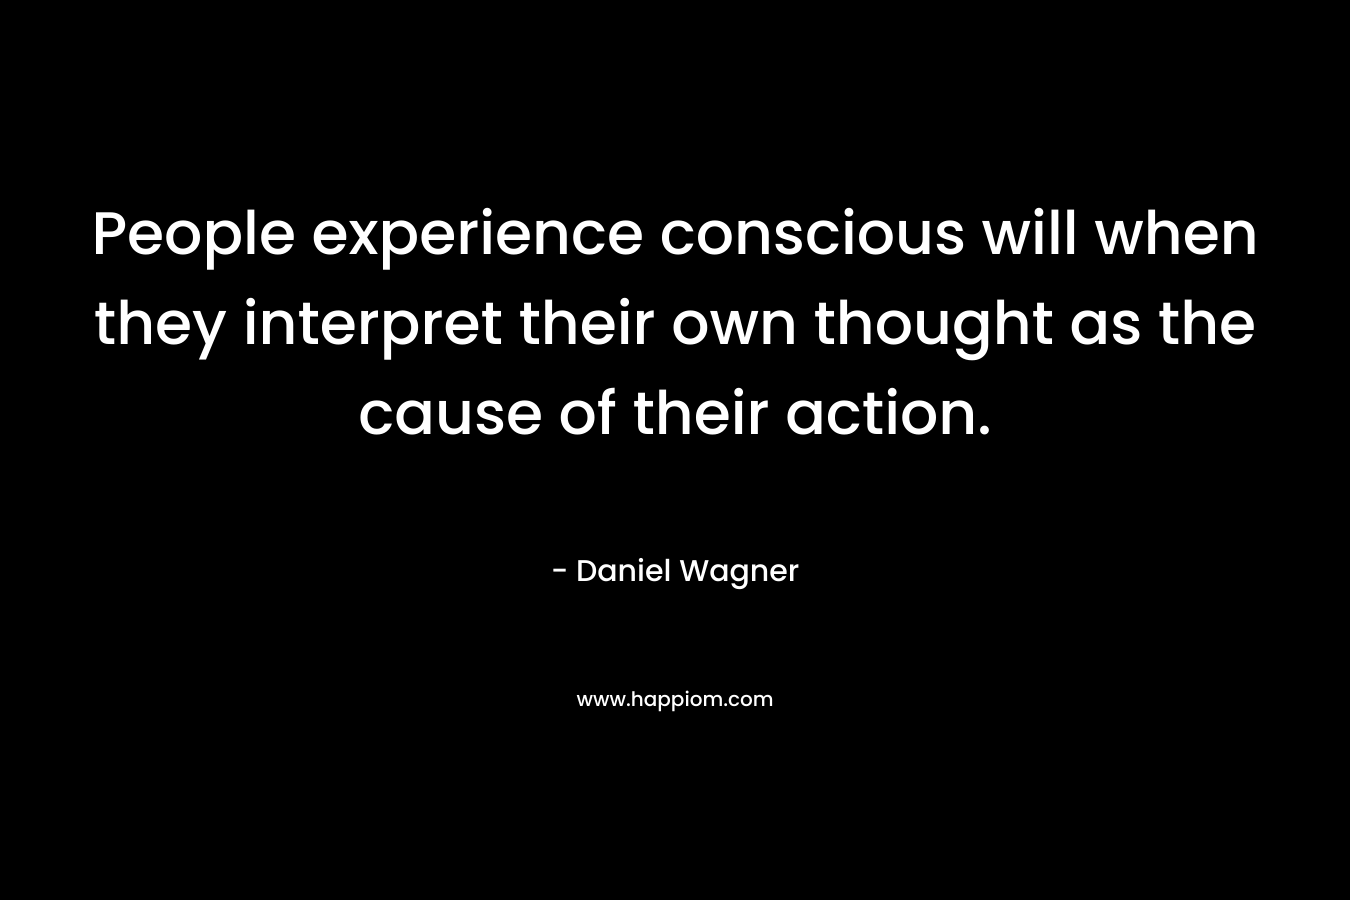 People experience conscious will when they interpret their own thought as the cause of their action.